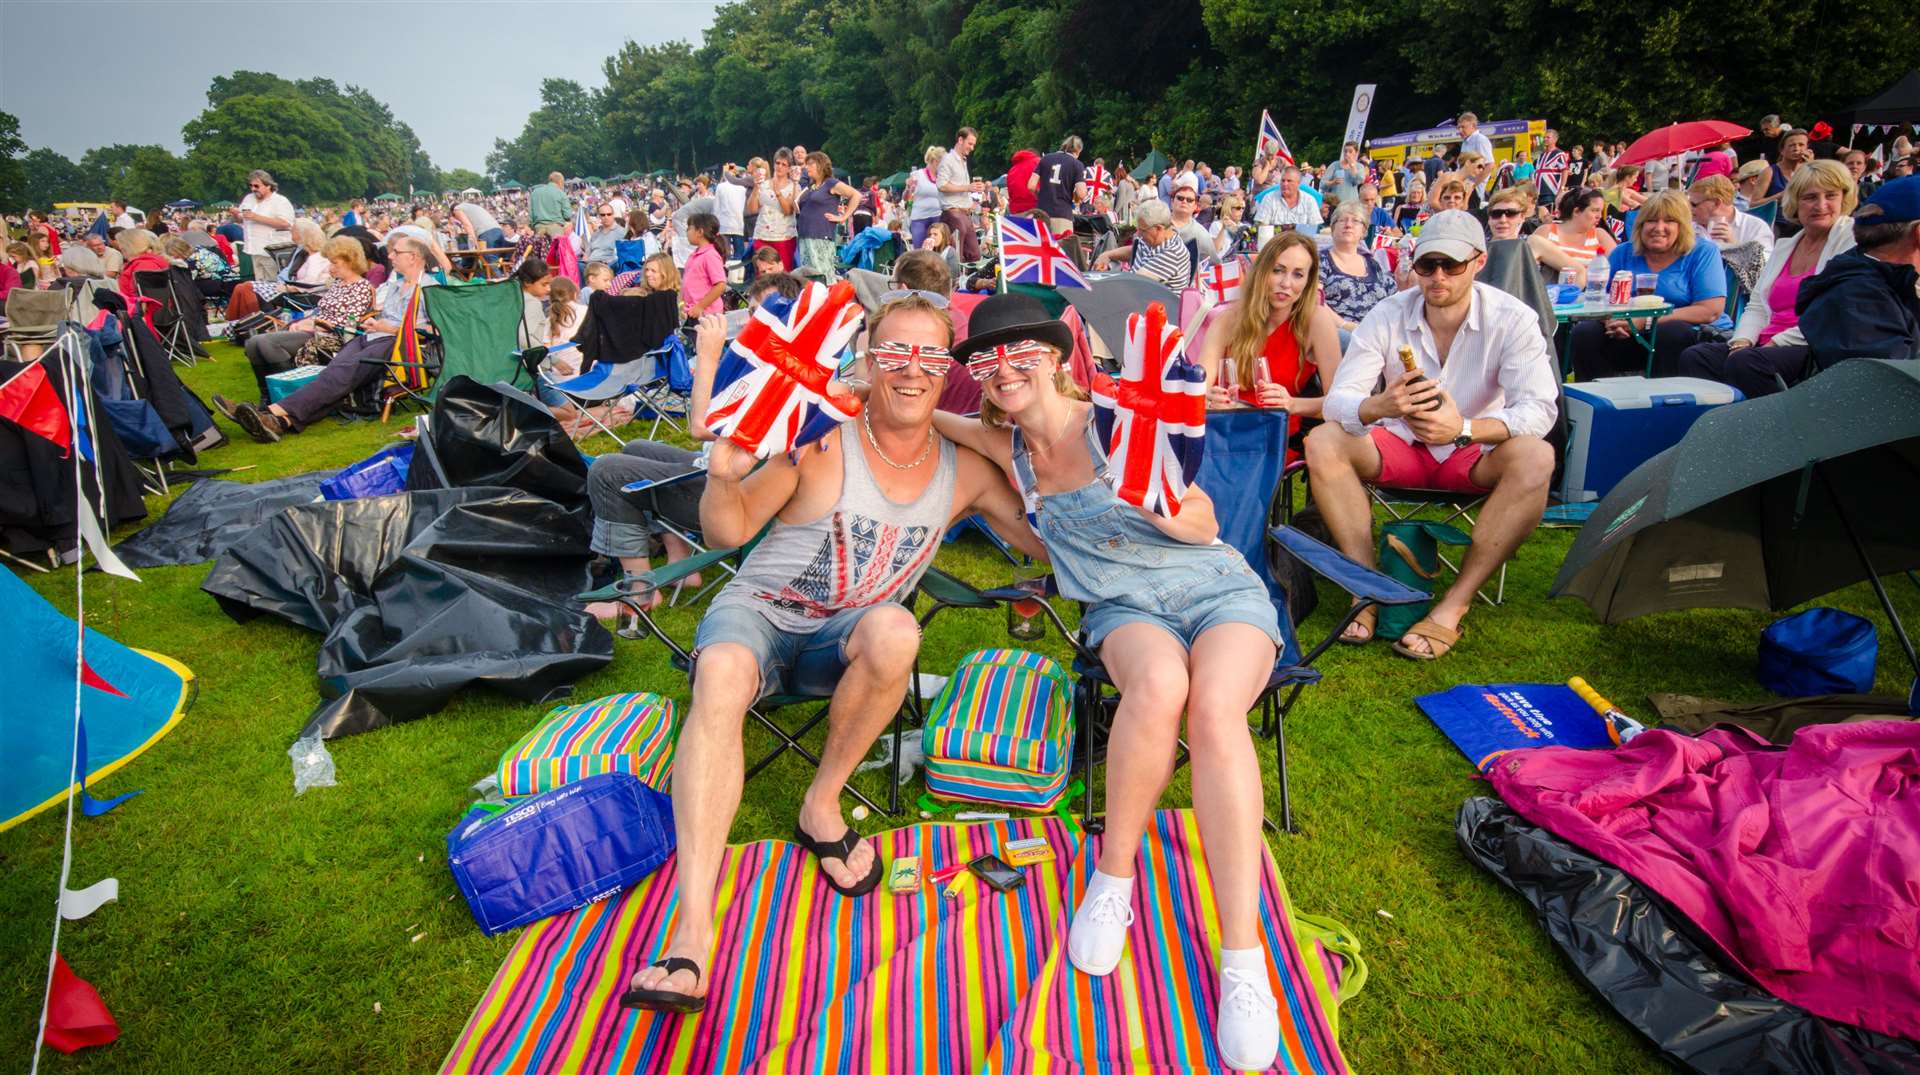 The crowd at the Leeds Castle Concert get into the spirit